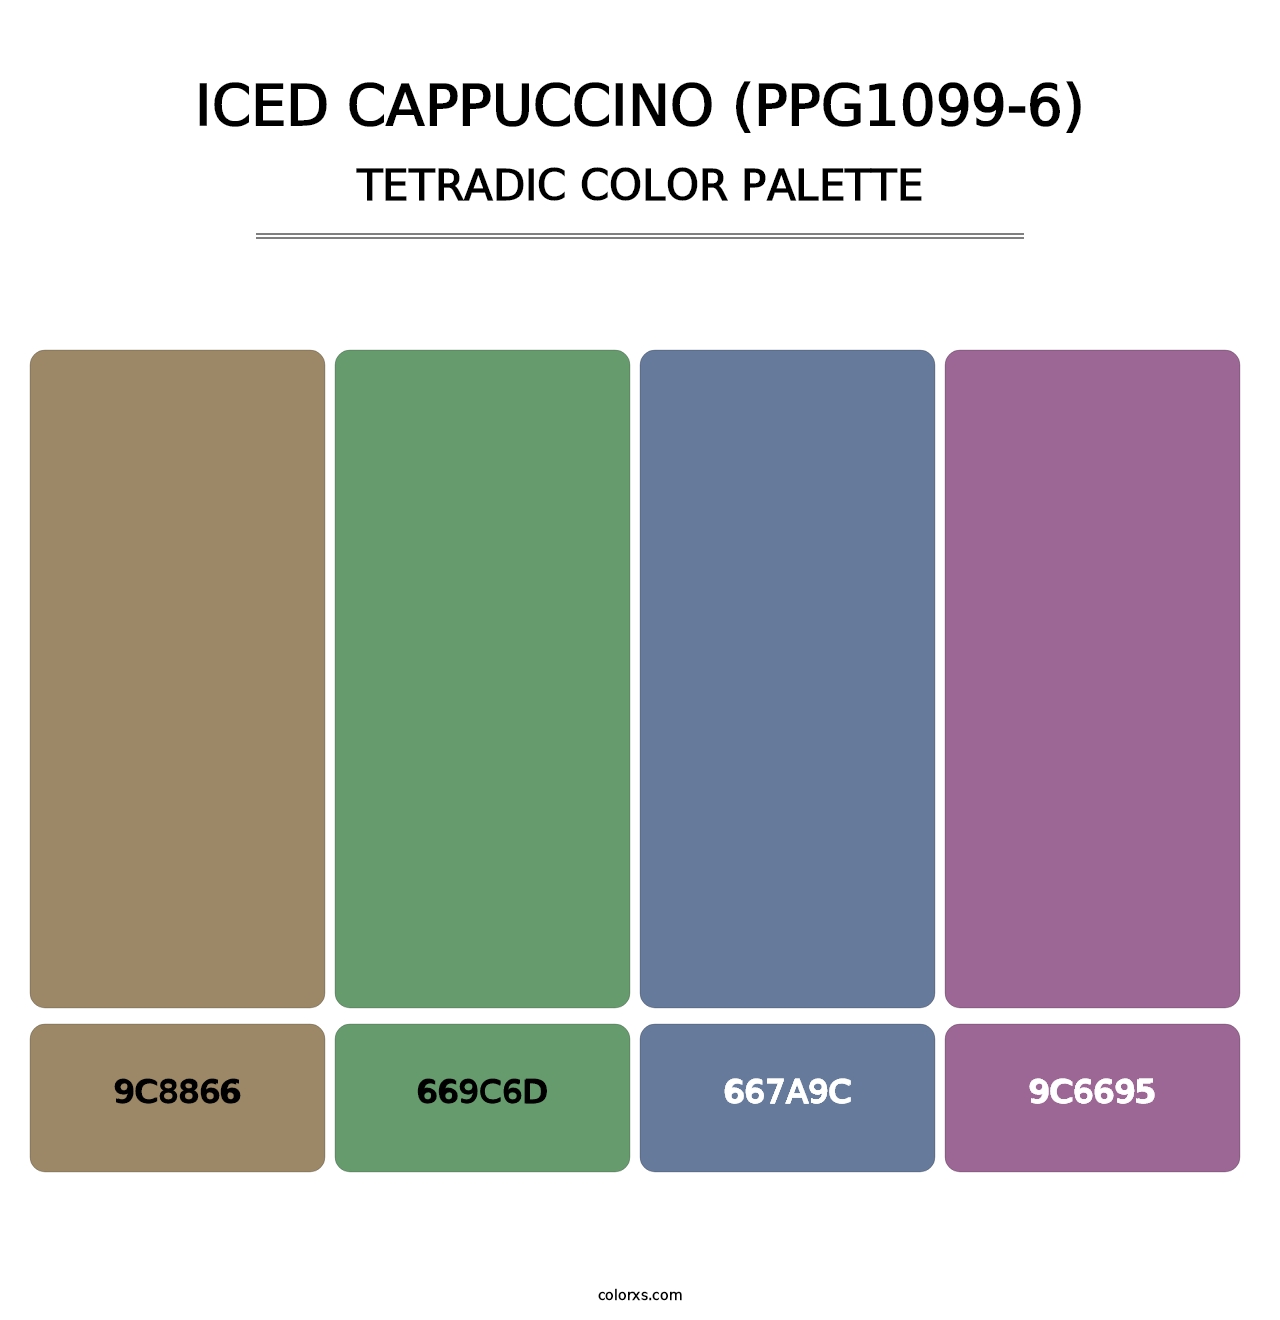 Iced Cappuccino (PPG1099-6) - Tetradic Color Palette